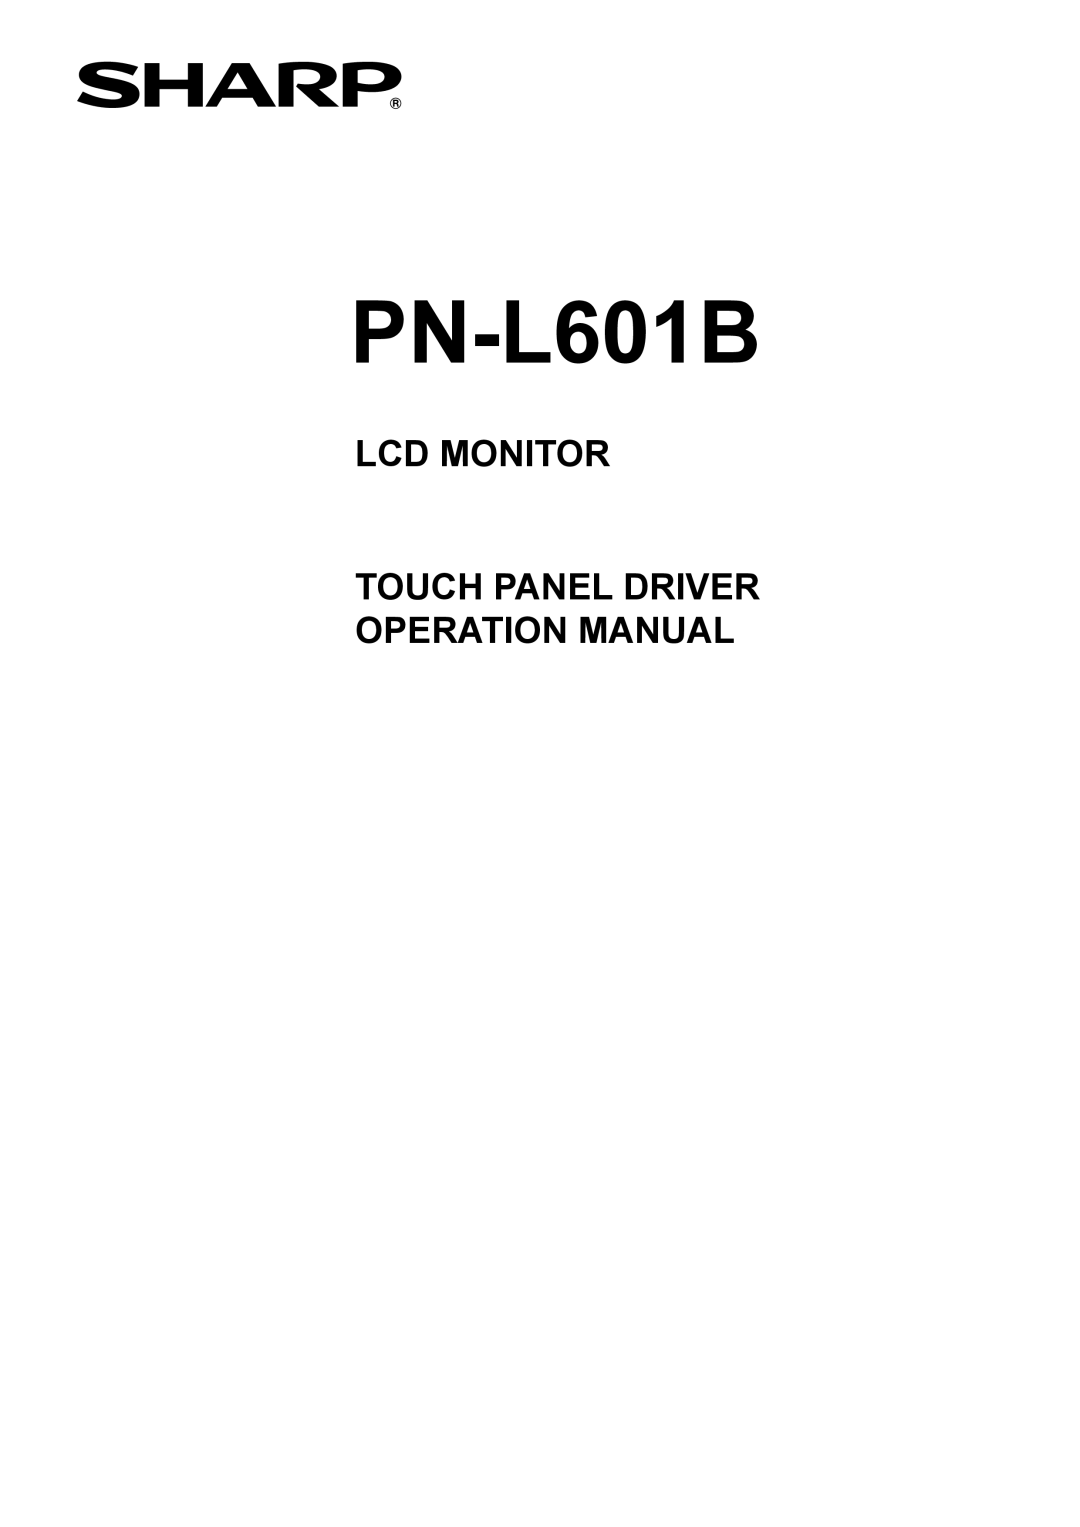 Sharp PN-ZB01 manual PN-L601B, Put the Power of Interaction to Work with, a Sharp Integrated Touch-ScreenDisplay Solution 